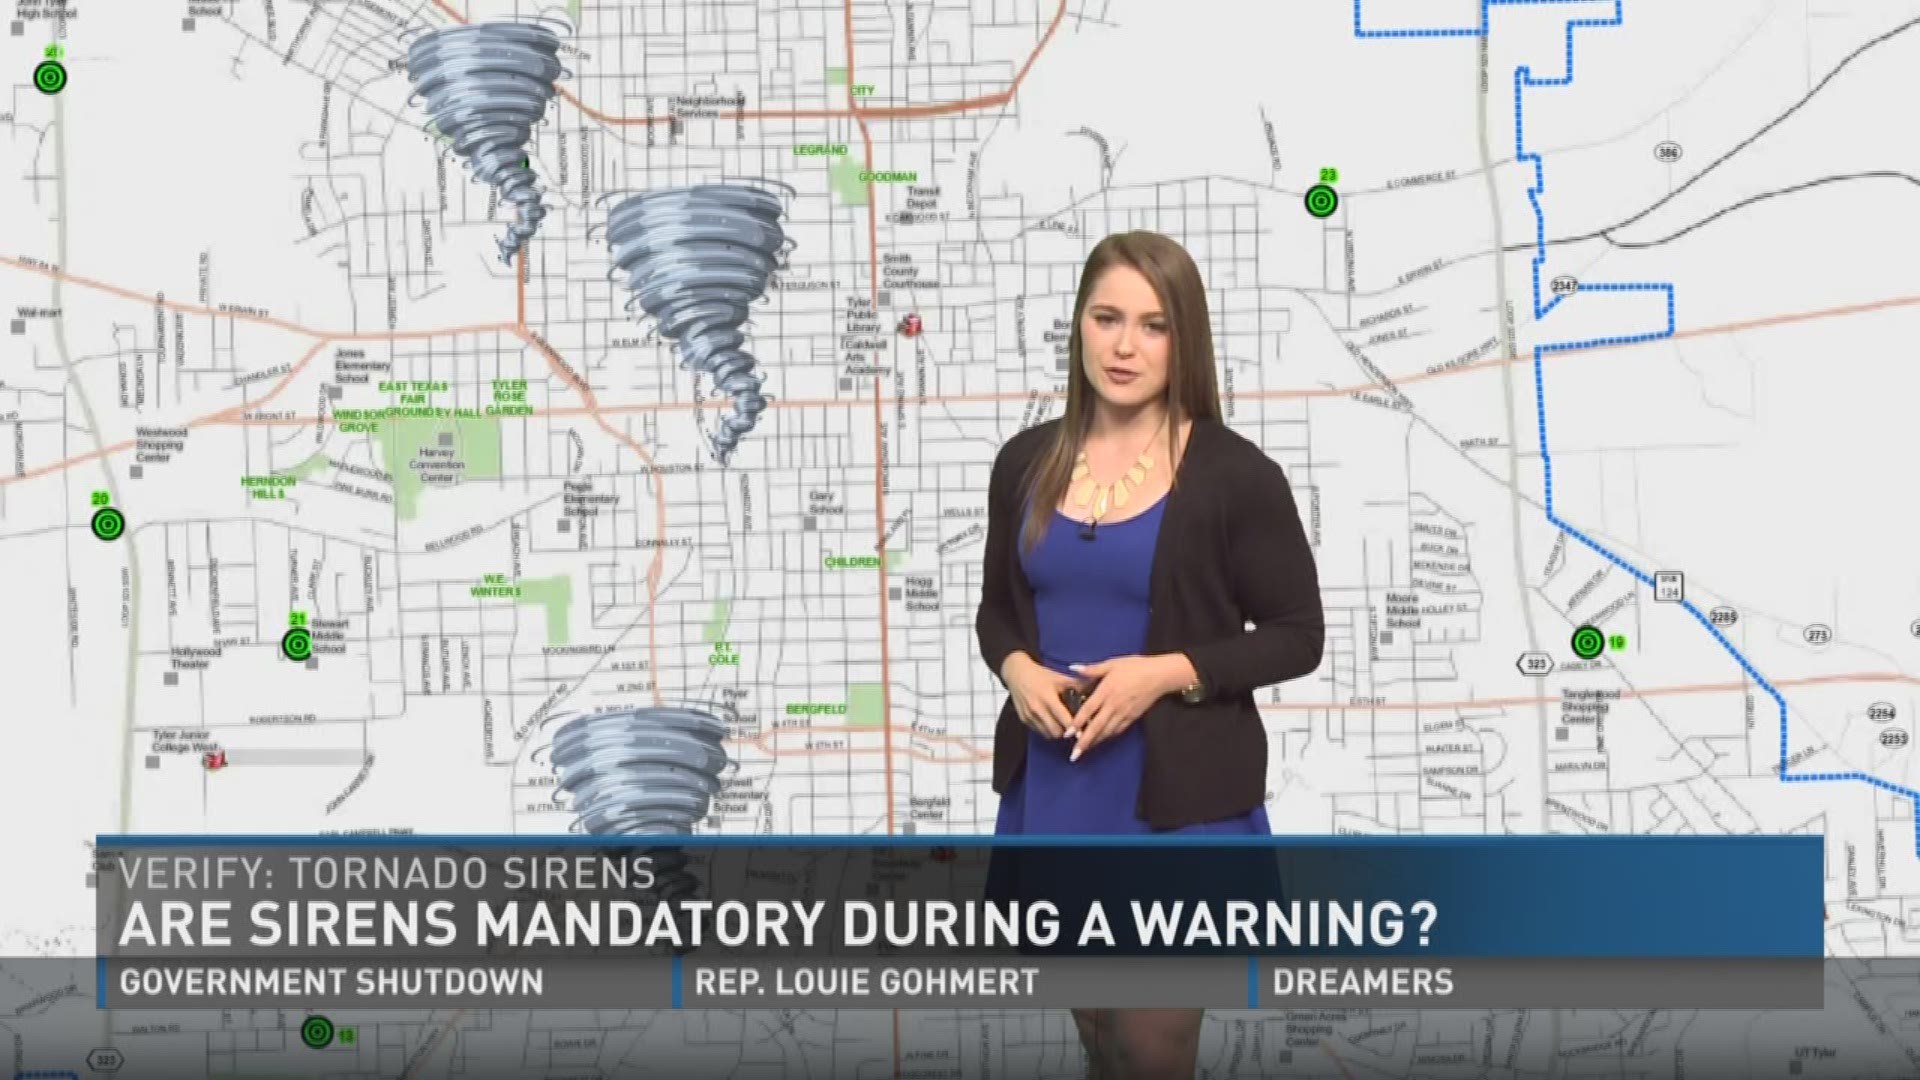 VERIFY: is it mandatory for sirens to go off during a tornado warning?